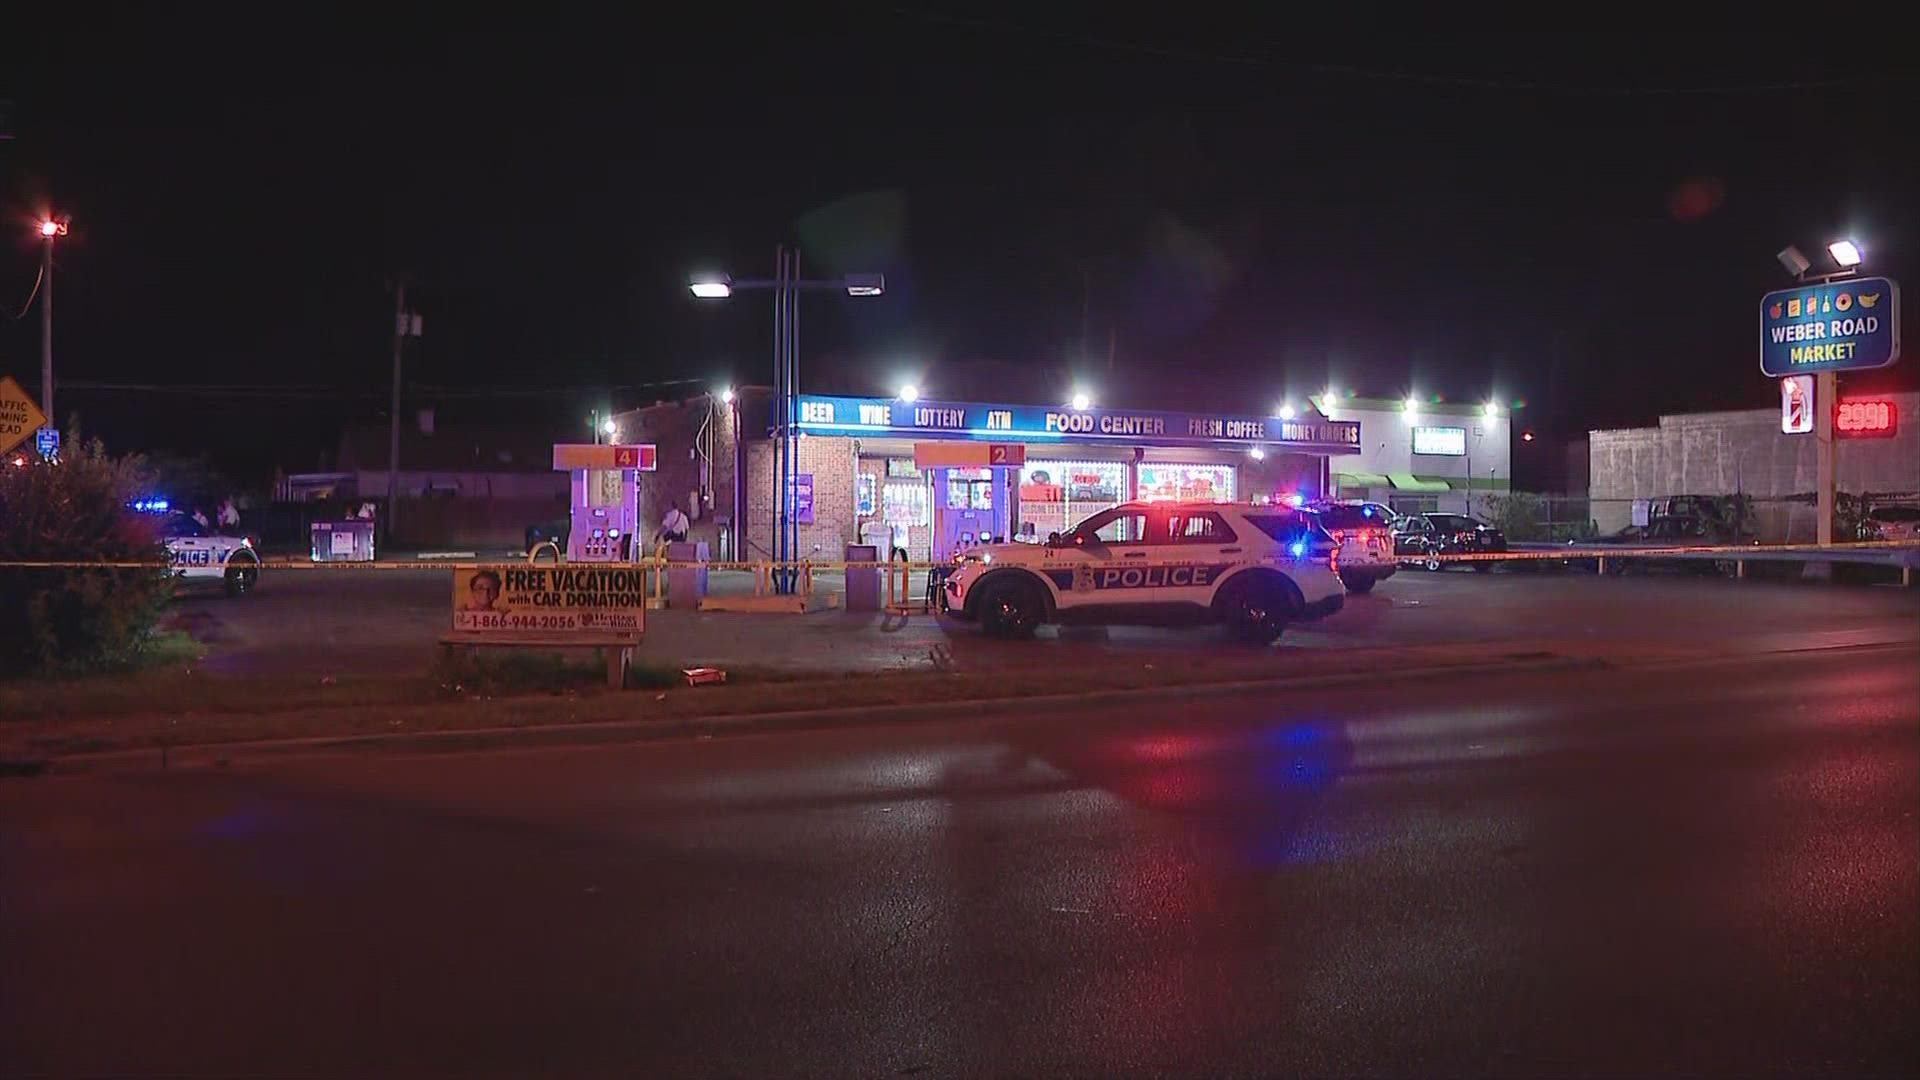 The shooting happened on the 900 block of East Weber Road just after 11 p.m.